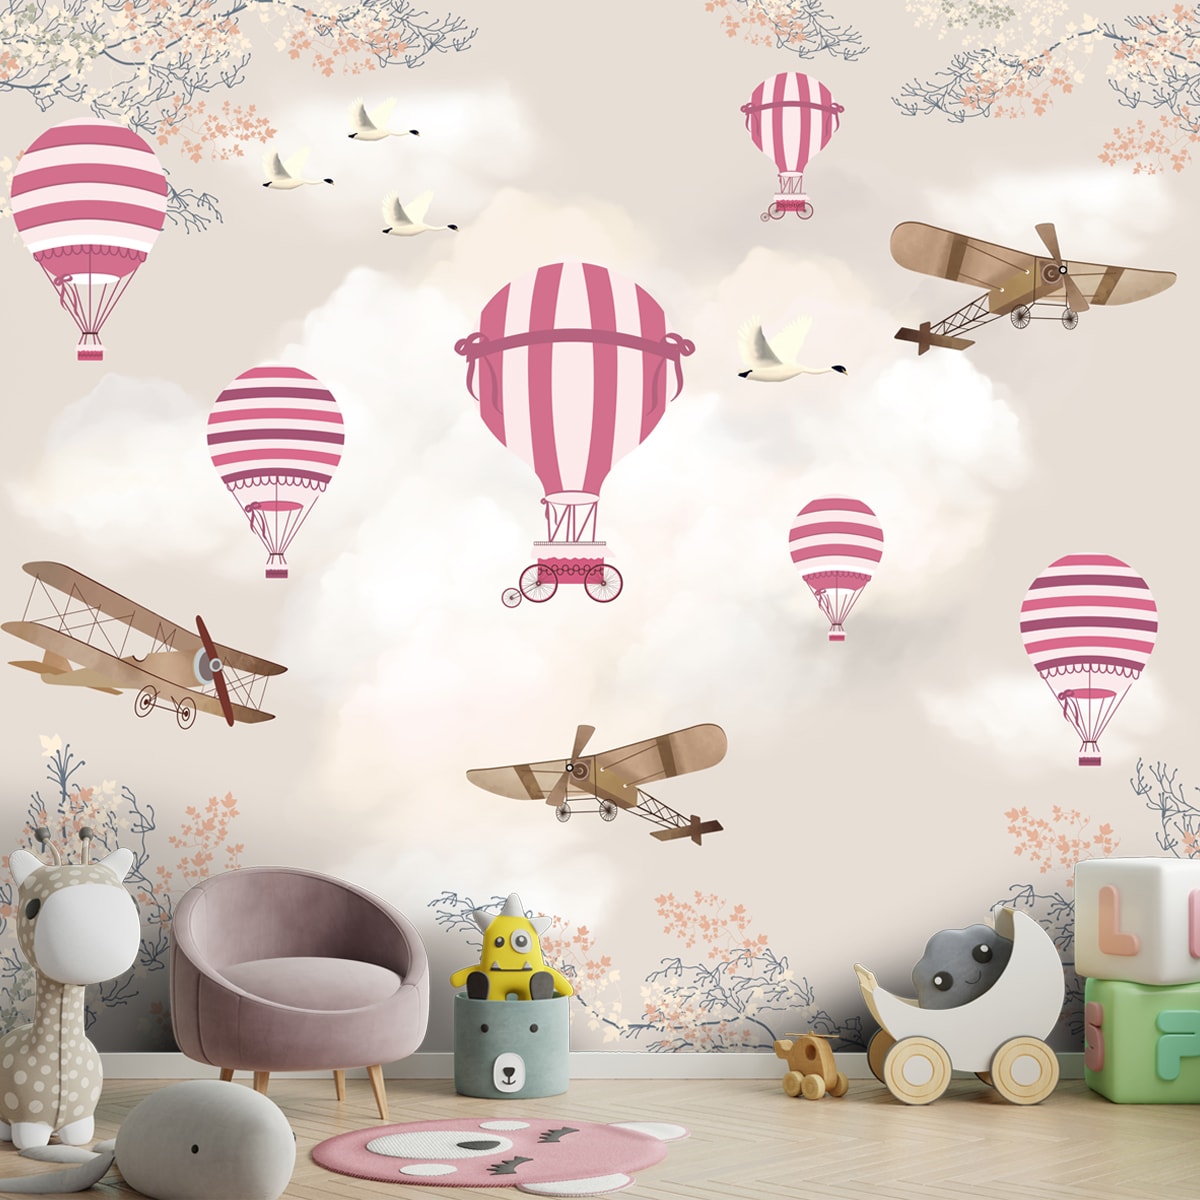 Hot Air Balloons with Gliders Wallpaper for Kids Room Wall, Pink